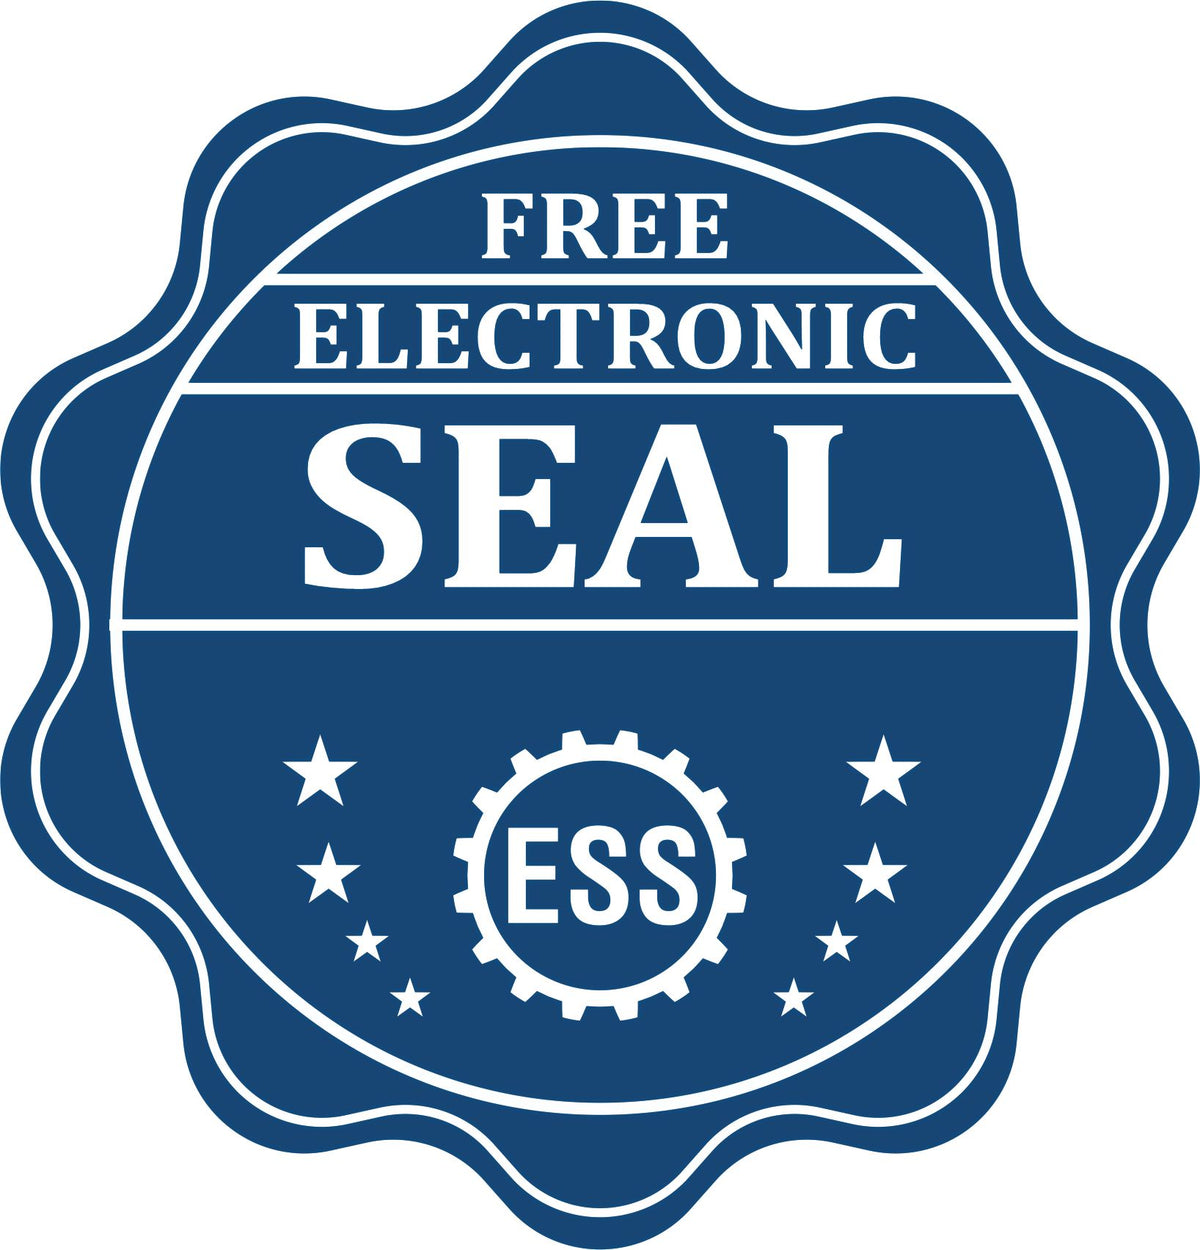 A badge showing a free electronic seal for the Super Slim Virginia Notary Public Stamp with stars and the ESS gear on the emblem.